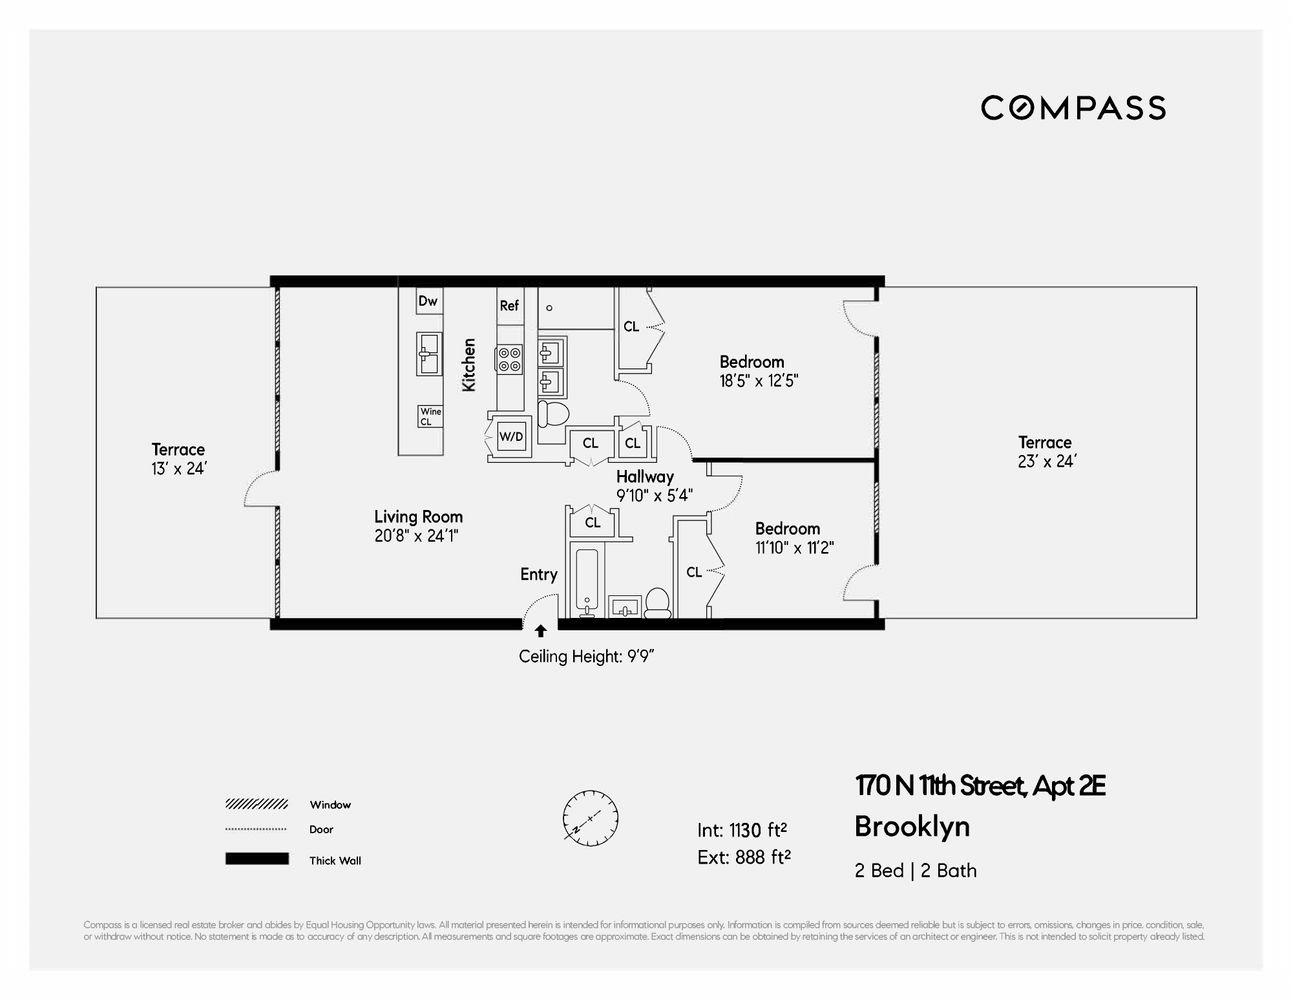 floorplan with terraces on either end of the apartment